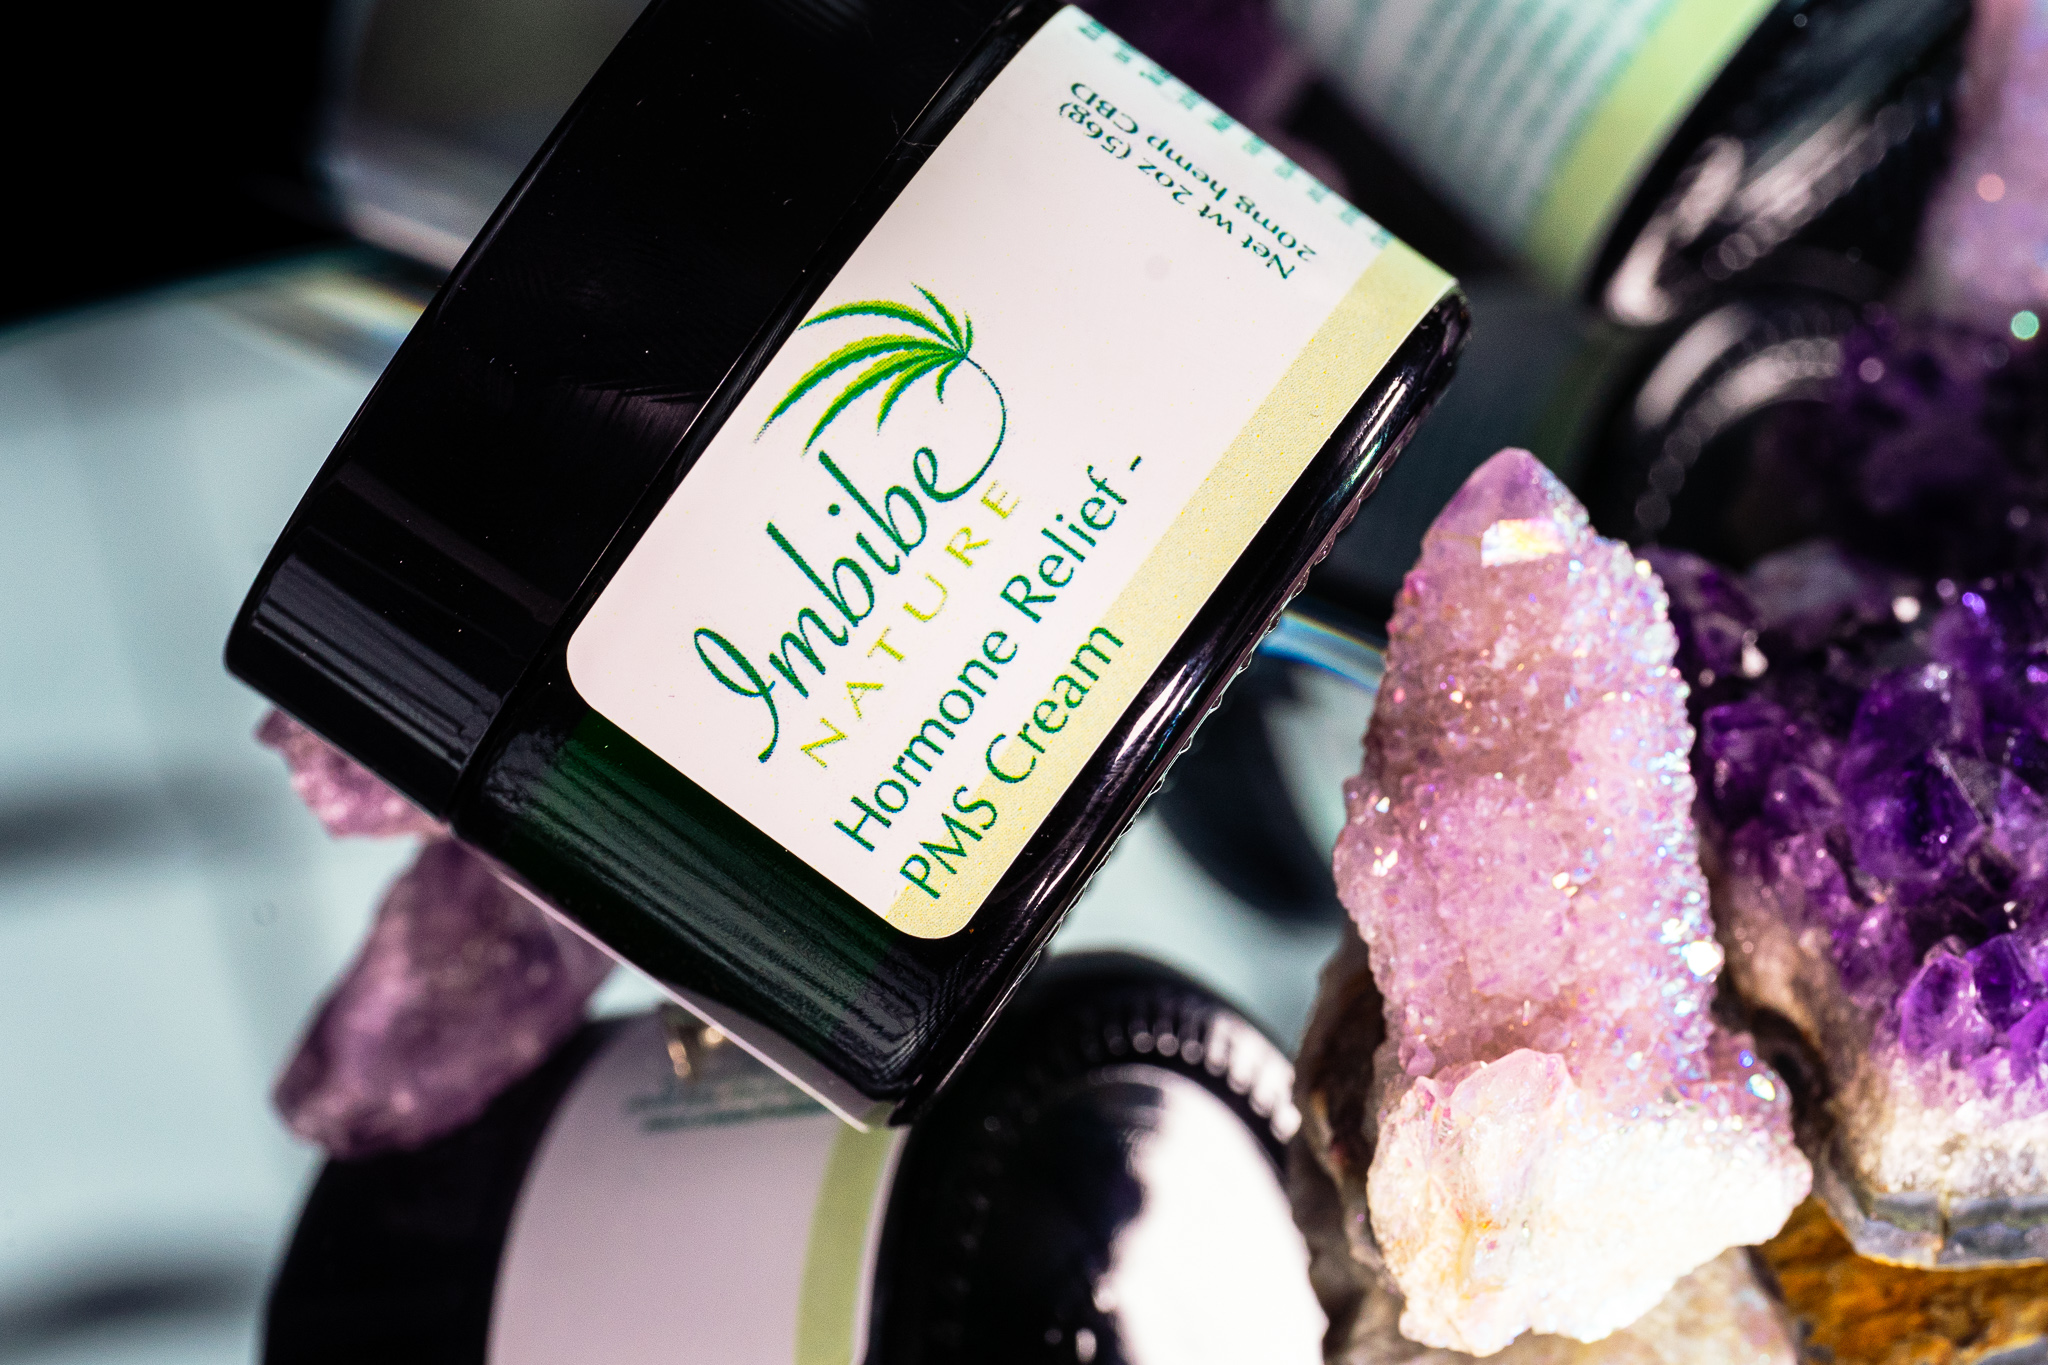 A jar of Imbibe Nature Hormone Relief PMS Cream surrounded by a variety of light and dark purple crystals.